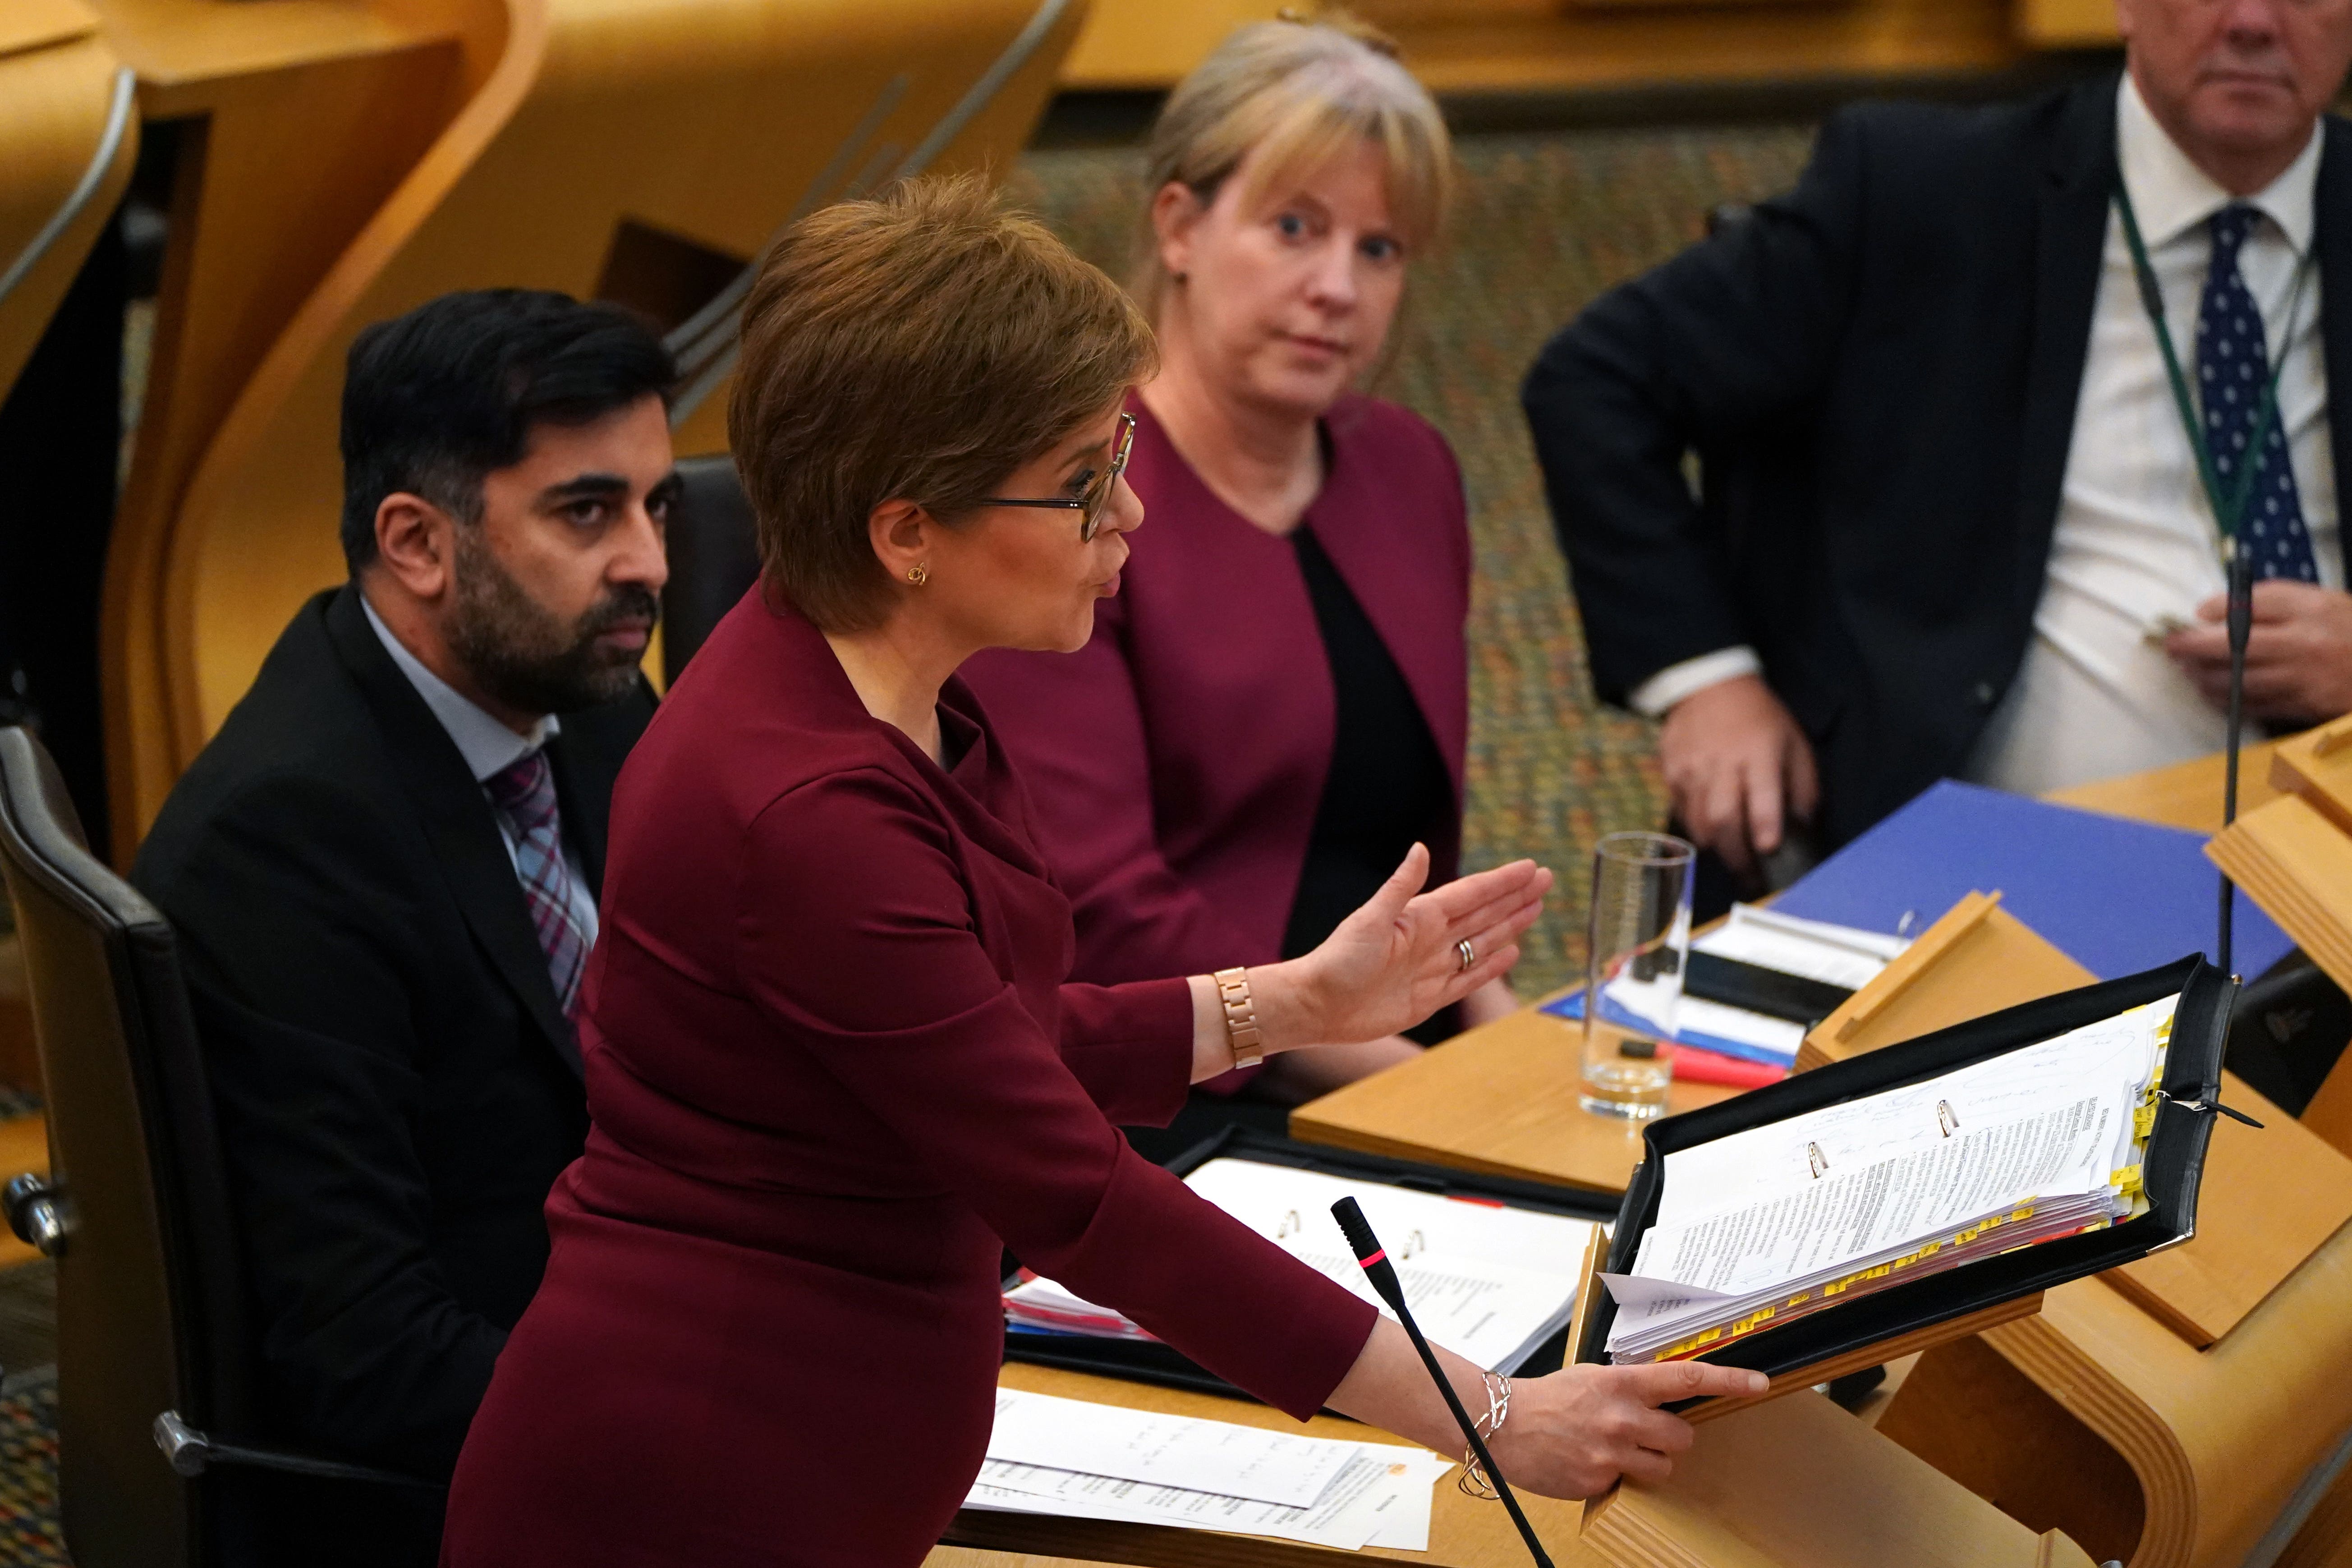 The First Minister told MSPs there was no room for complacency in dealing with the condition (Andrew Milligan/PA)